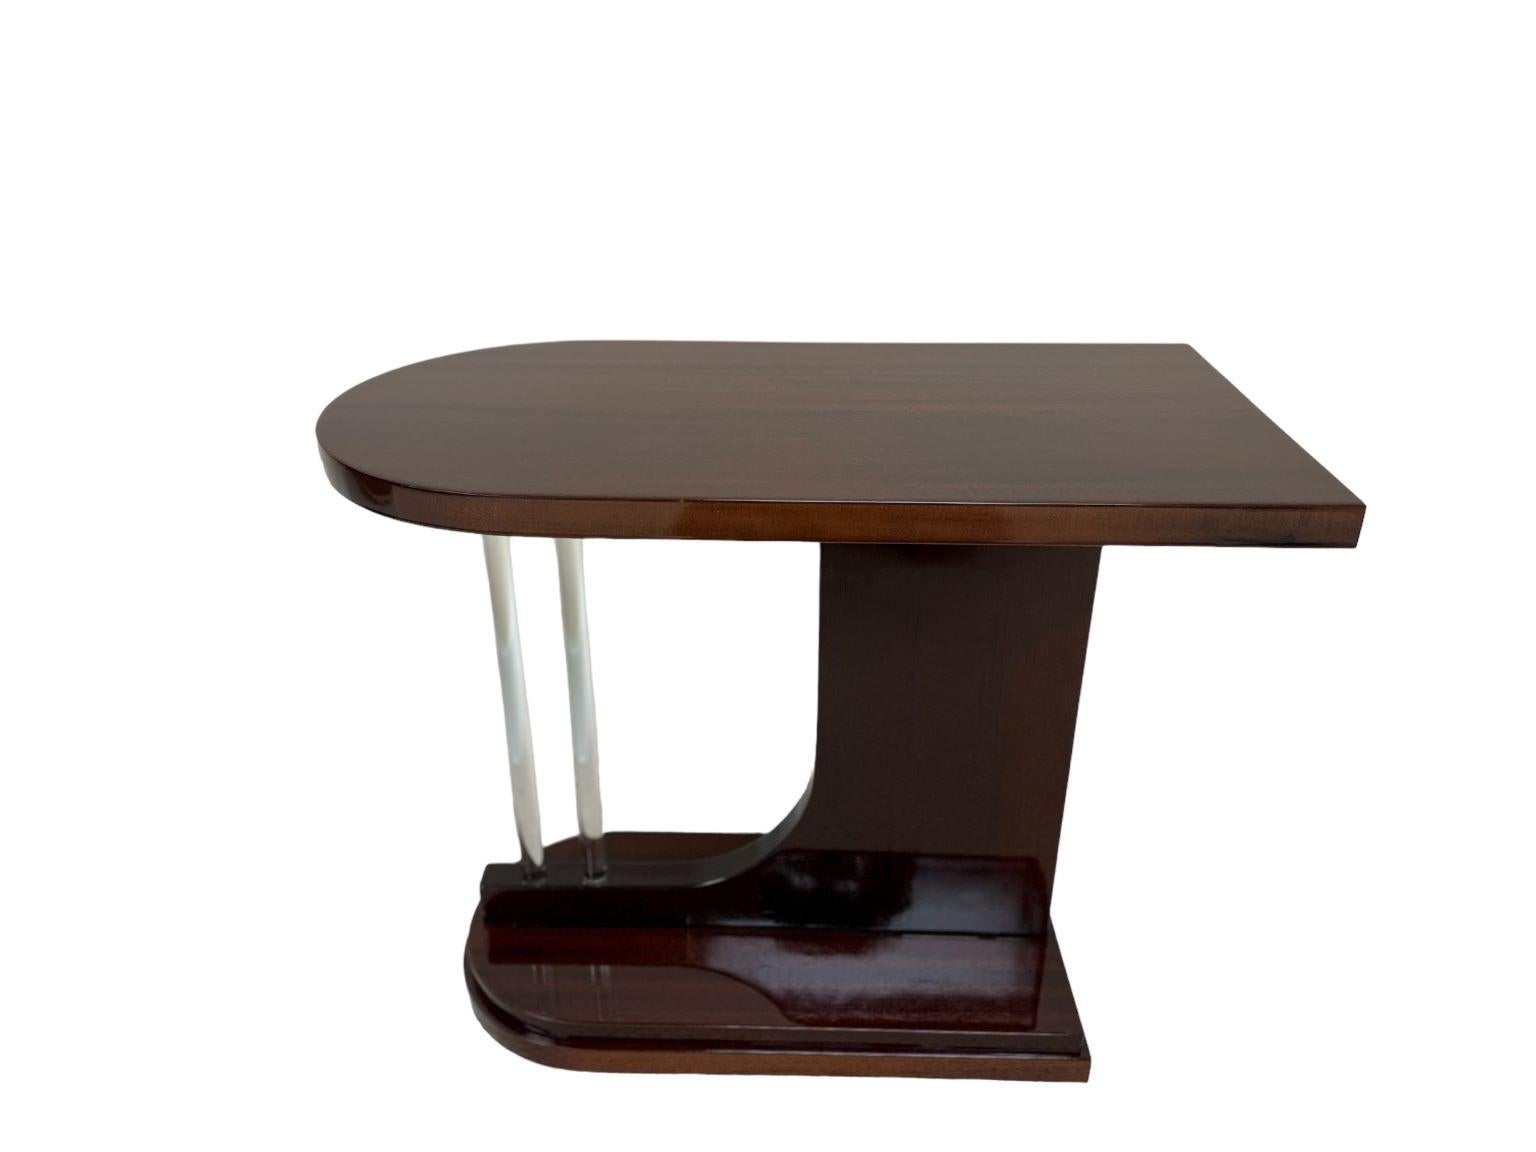 Mid-20th Century American Streamline Moderne  Art Deco Bullet Side Table With Glass Rods C.1930 For Sale